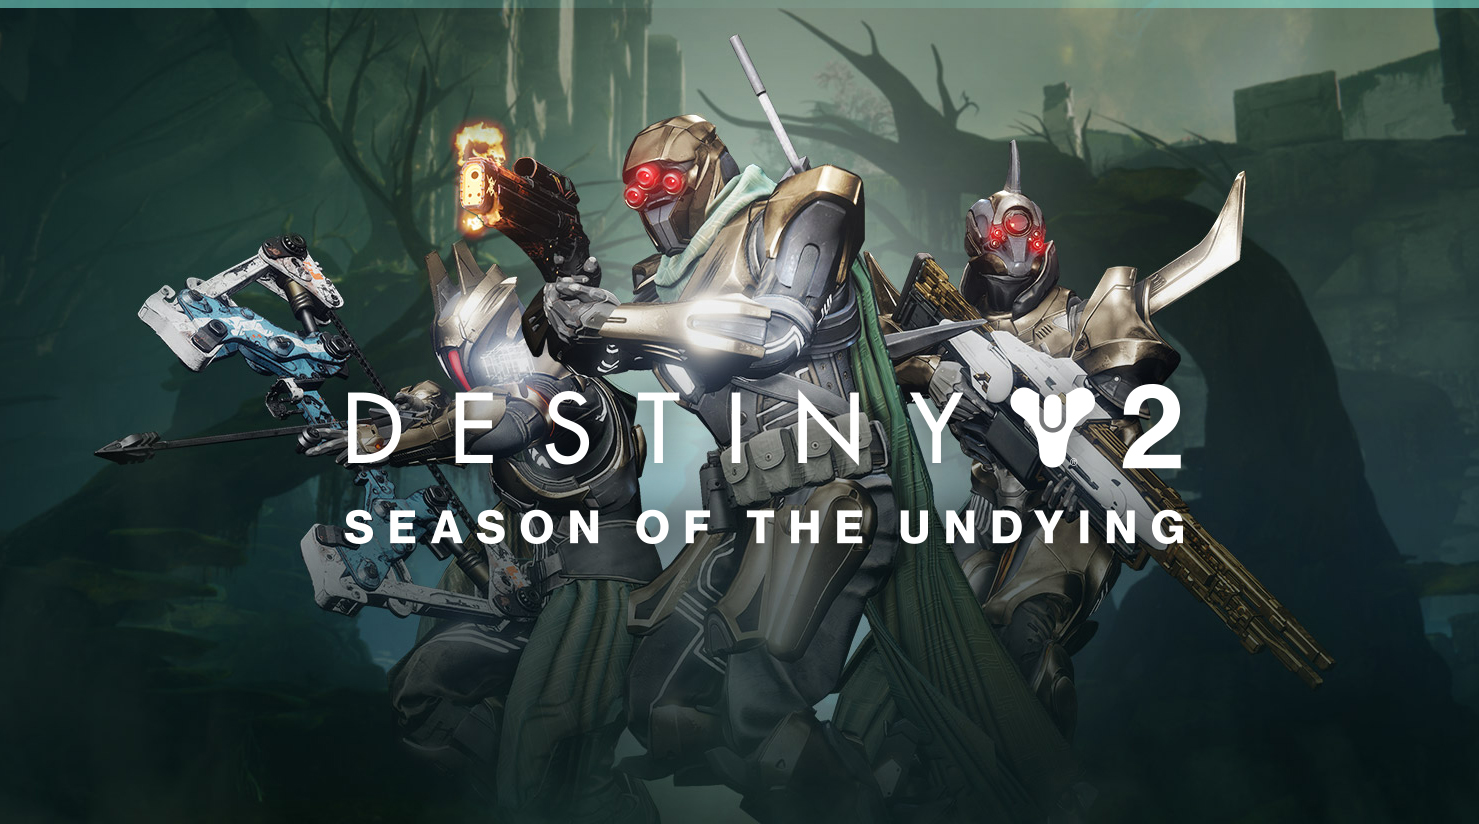 season of the undying